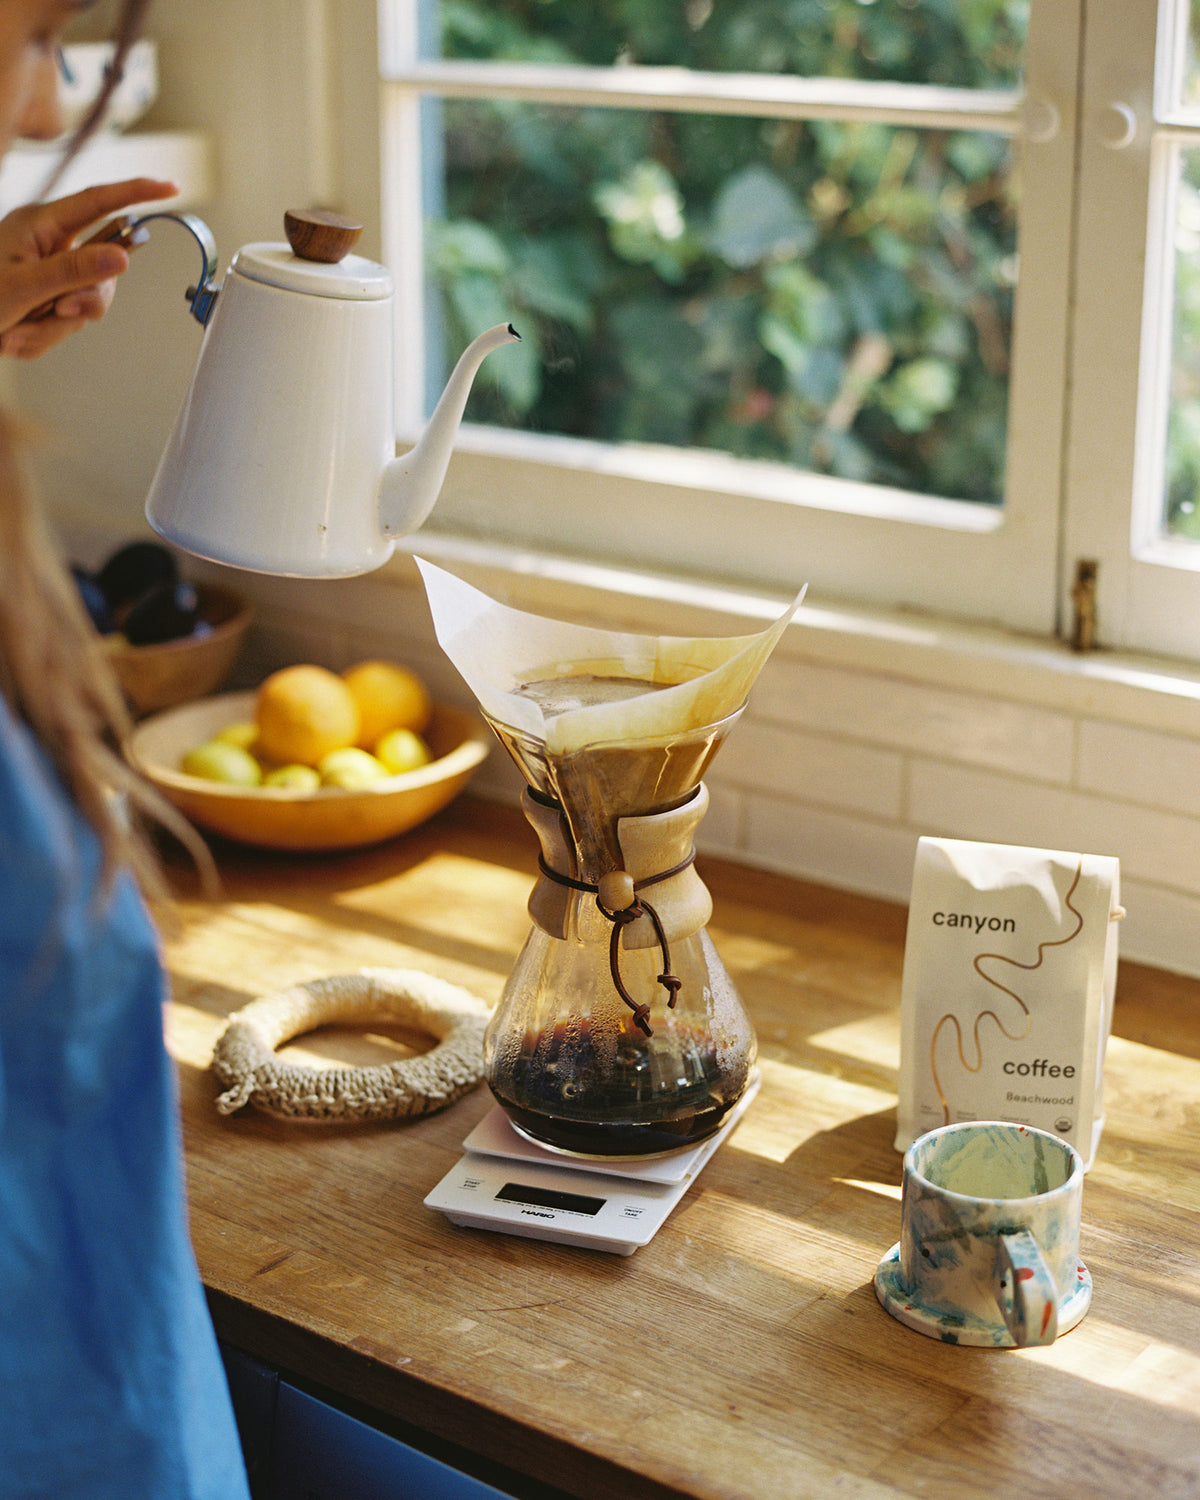 Chemex 8-Cup Coffee Maker, Home Goods